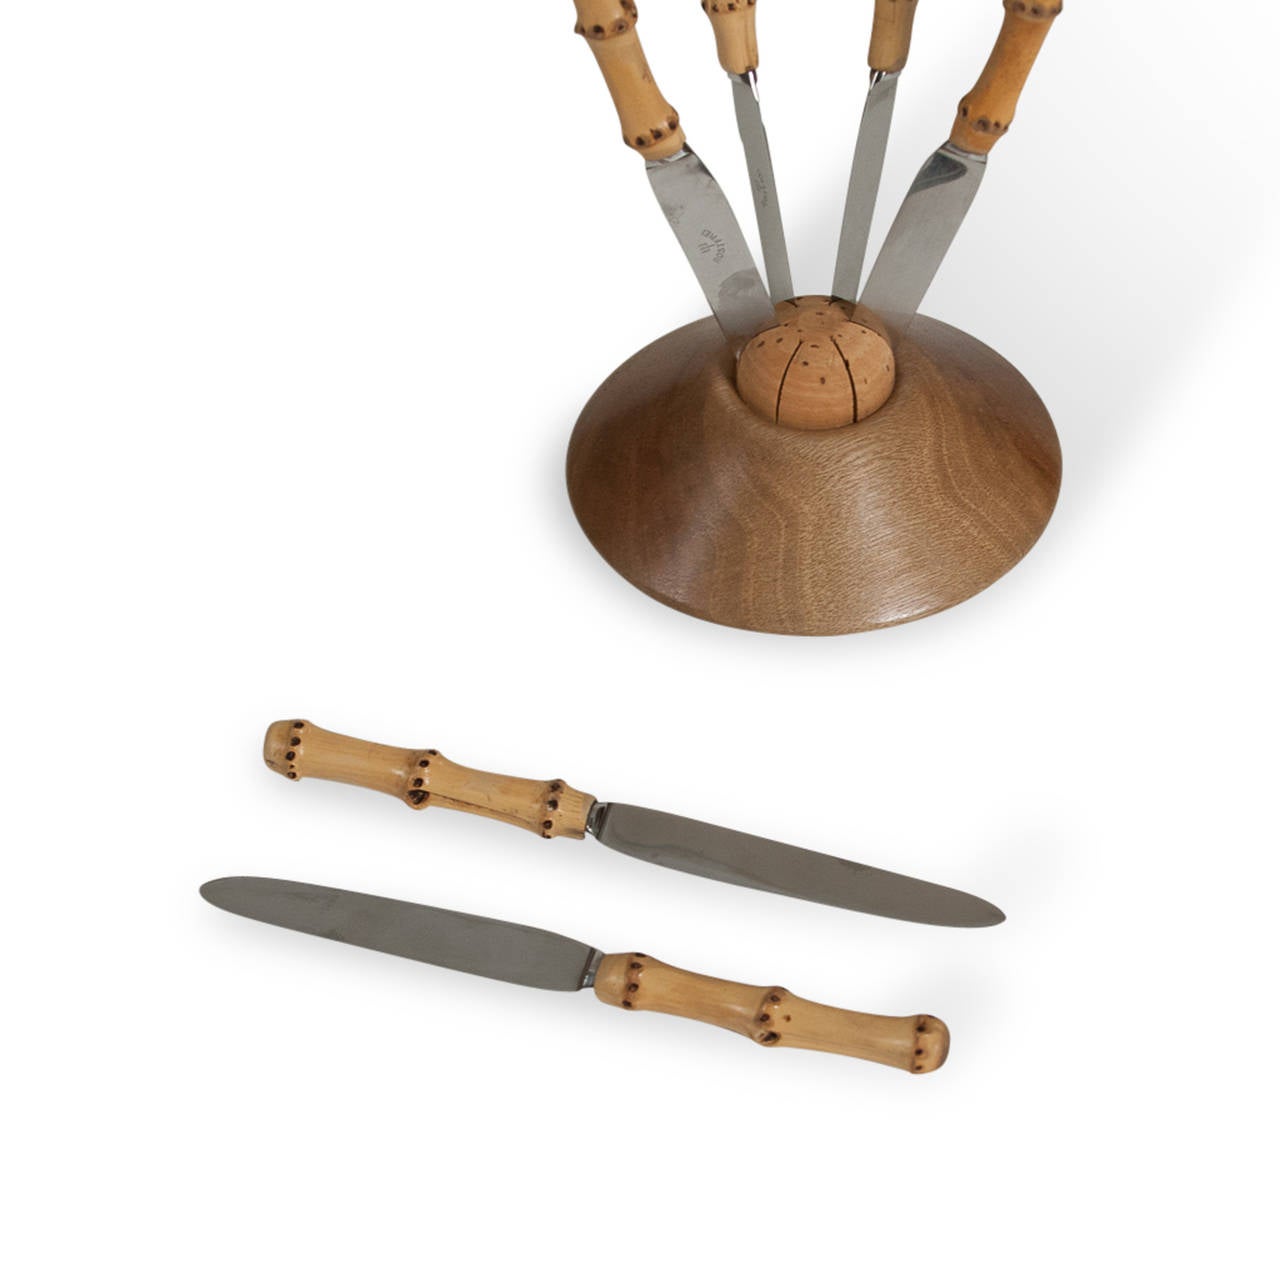 Mid-20th Century Bamboo Handle Knife Set, Austrian, 1950s For Sale